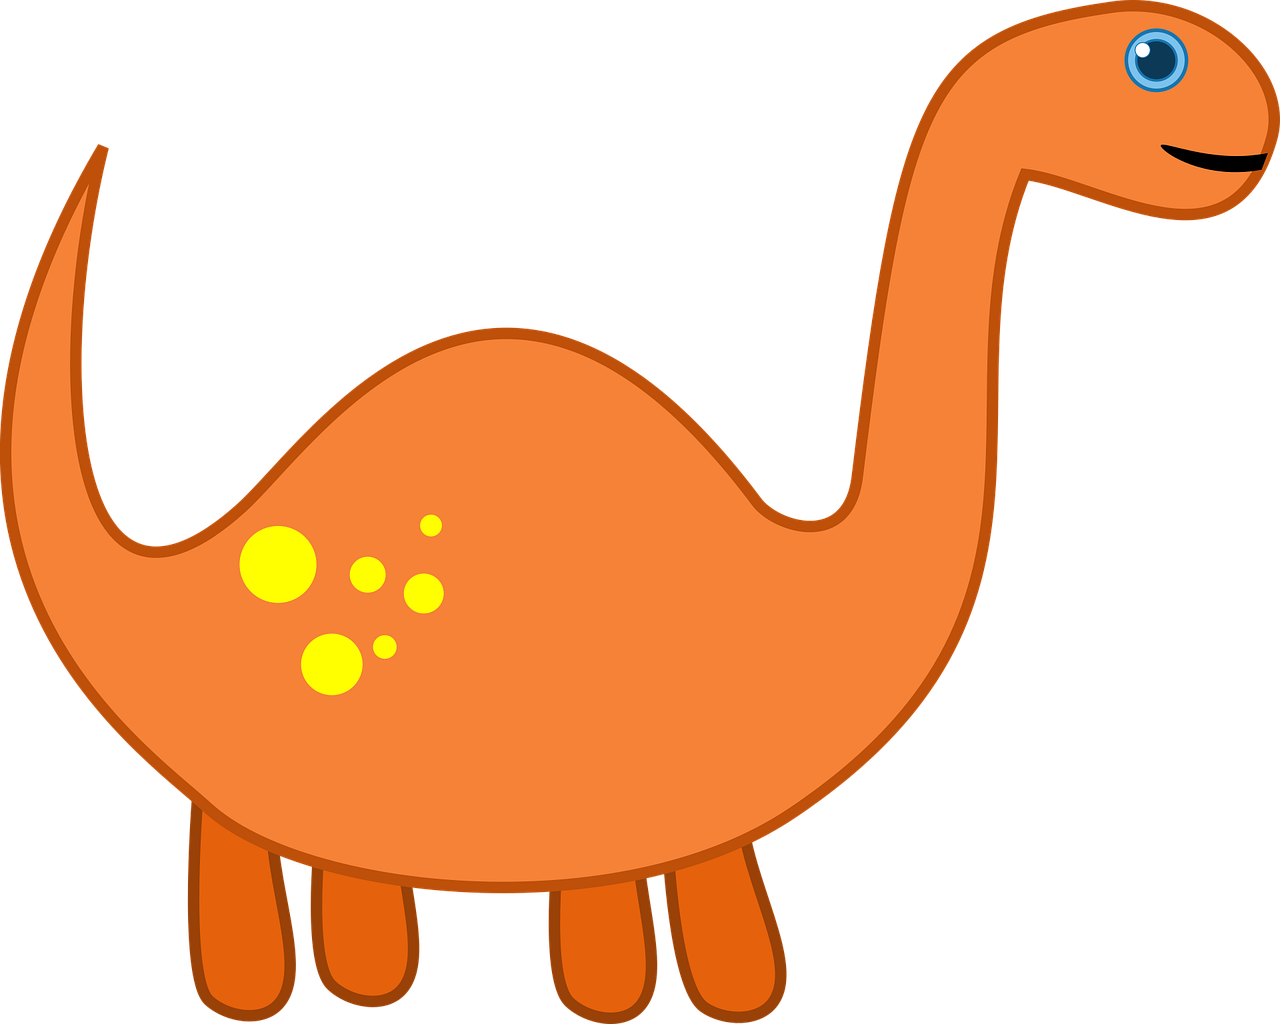 a cartoon dinosaur with spots on its body, a screenshot, inspired by Abidin Dino, pixabay, mingei, an orange, very long neck, cad, lowres